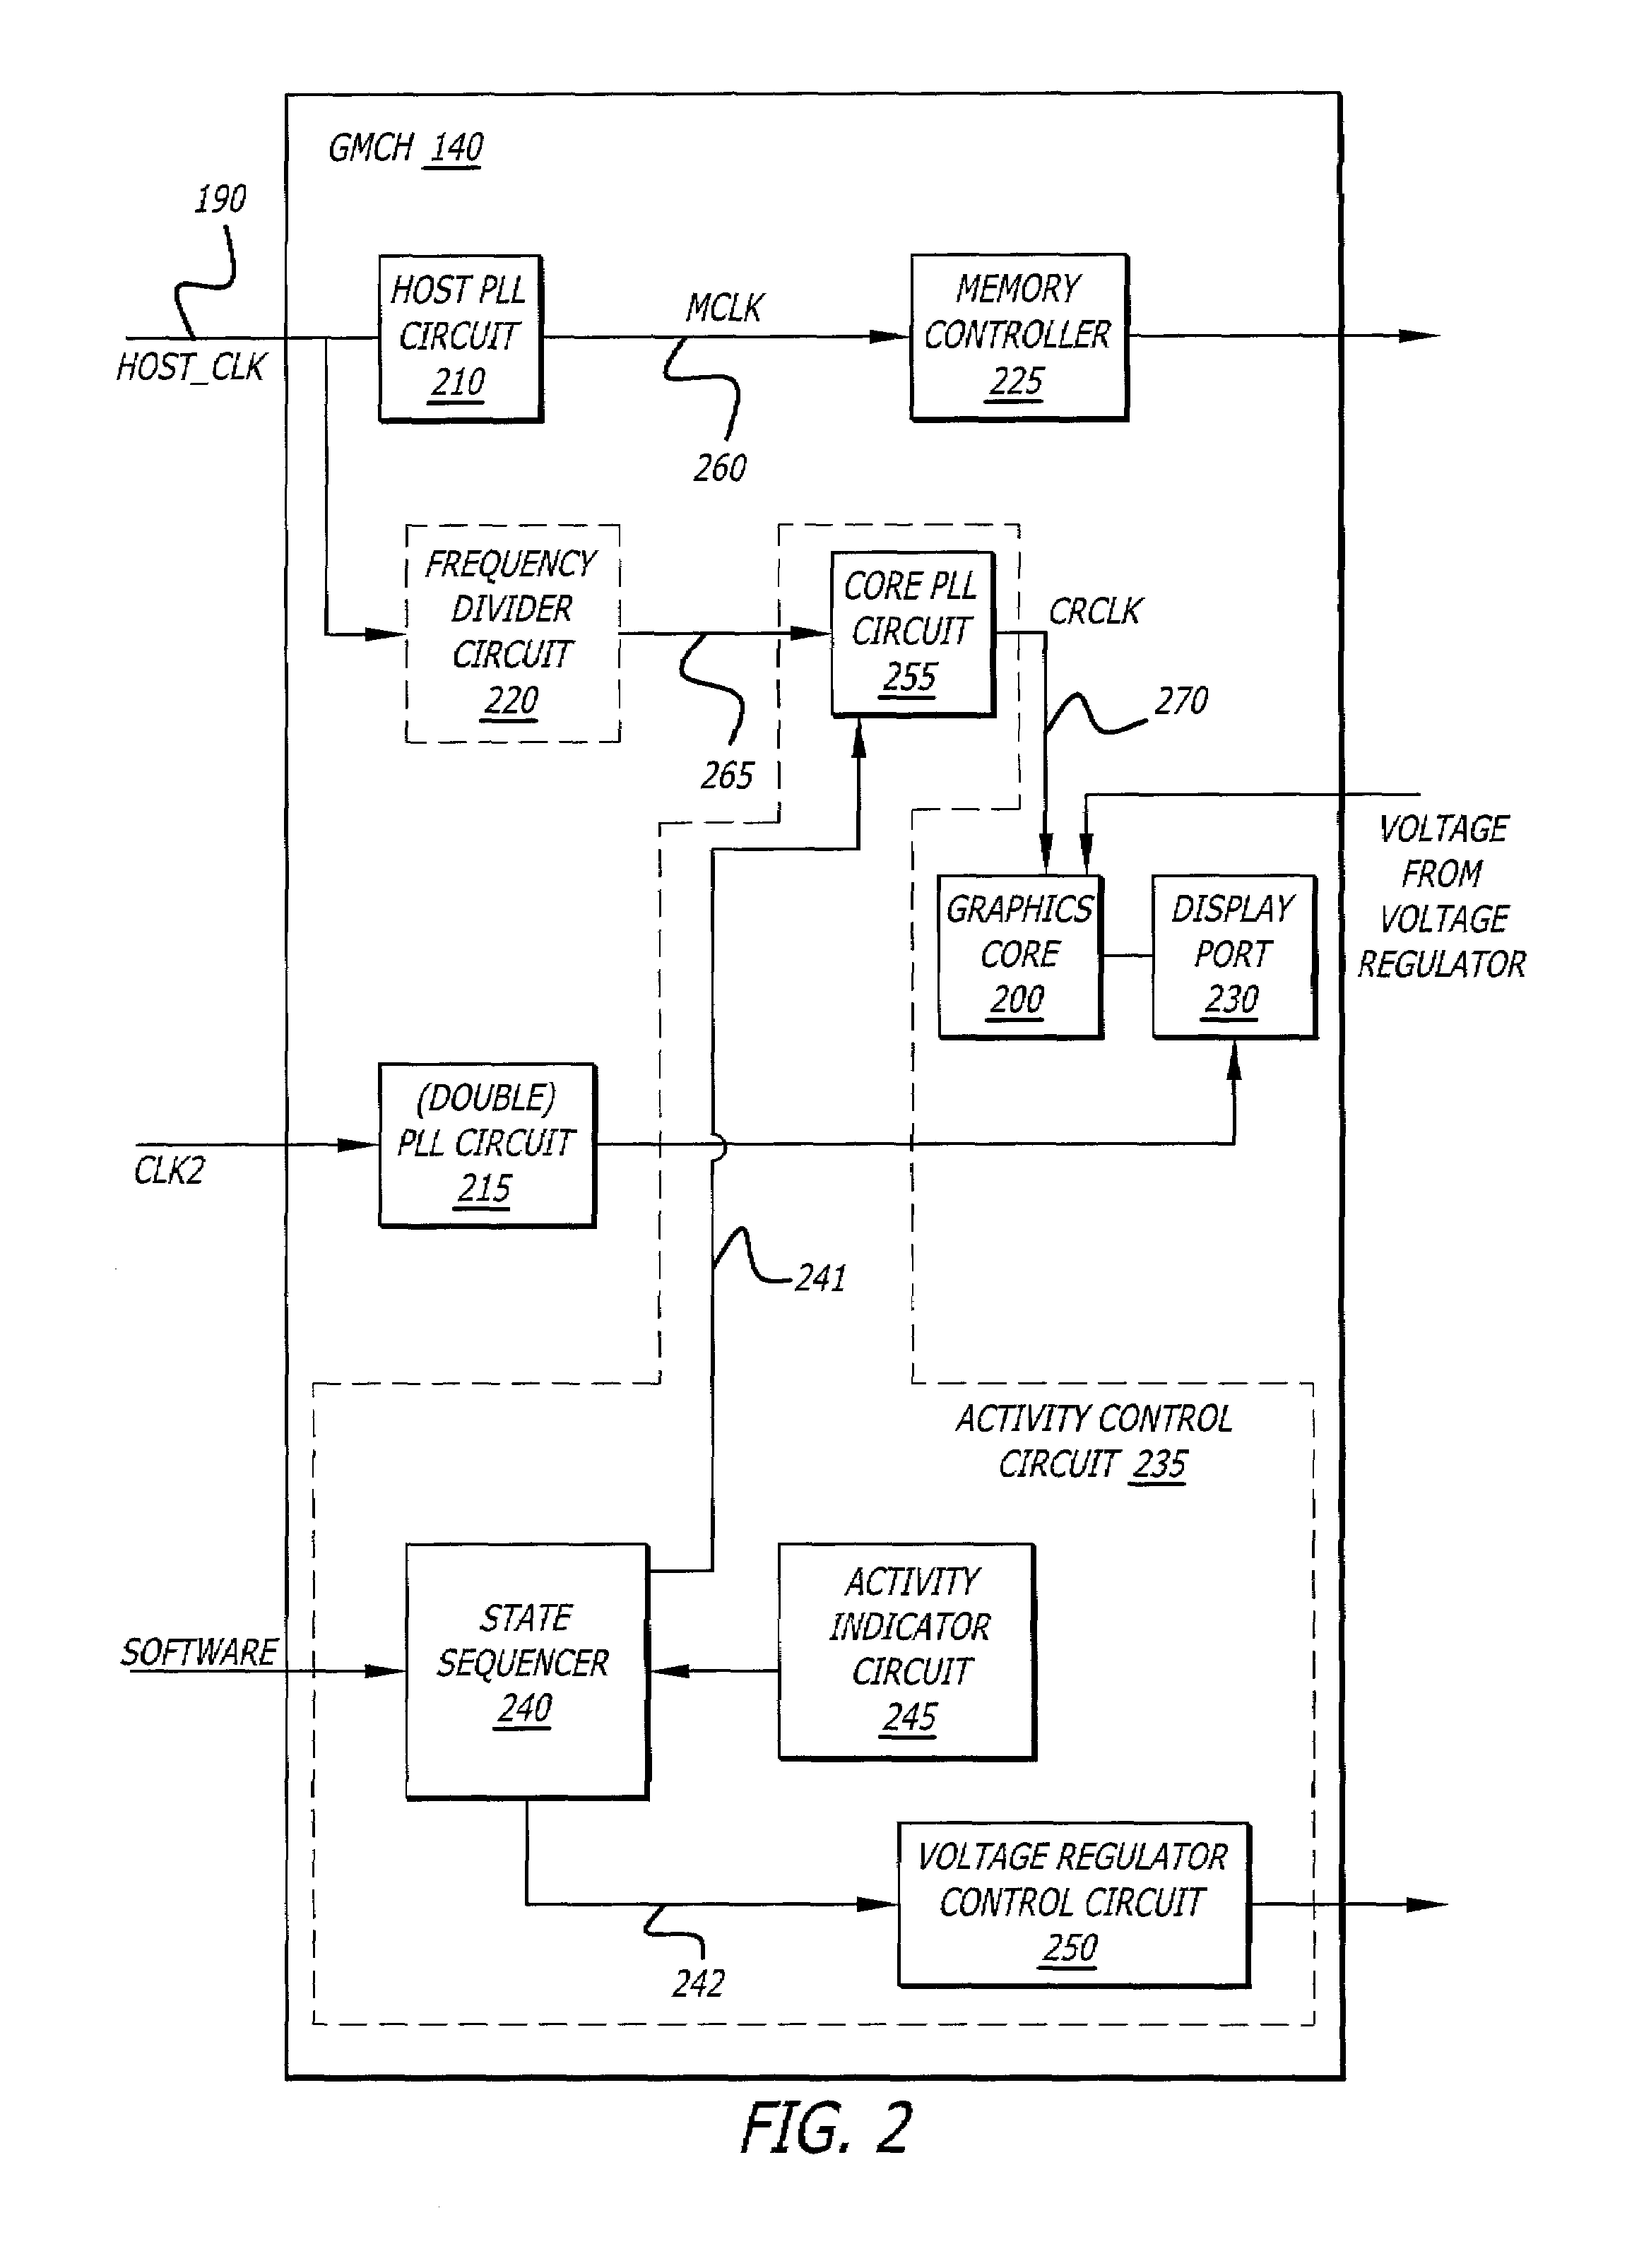 Power management for an integrated graphics device